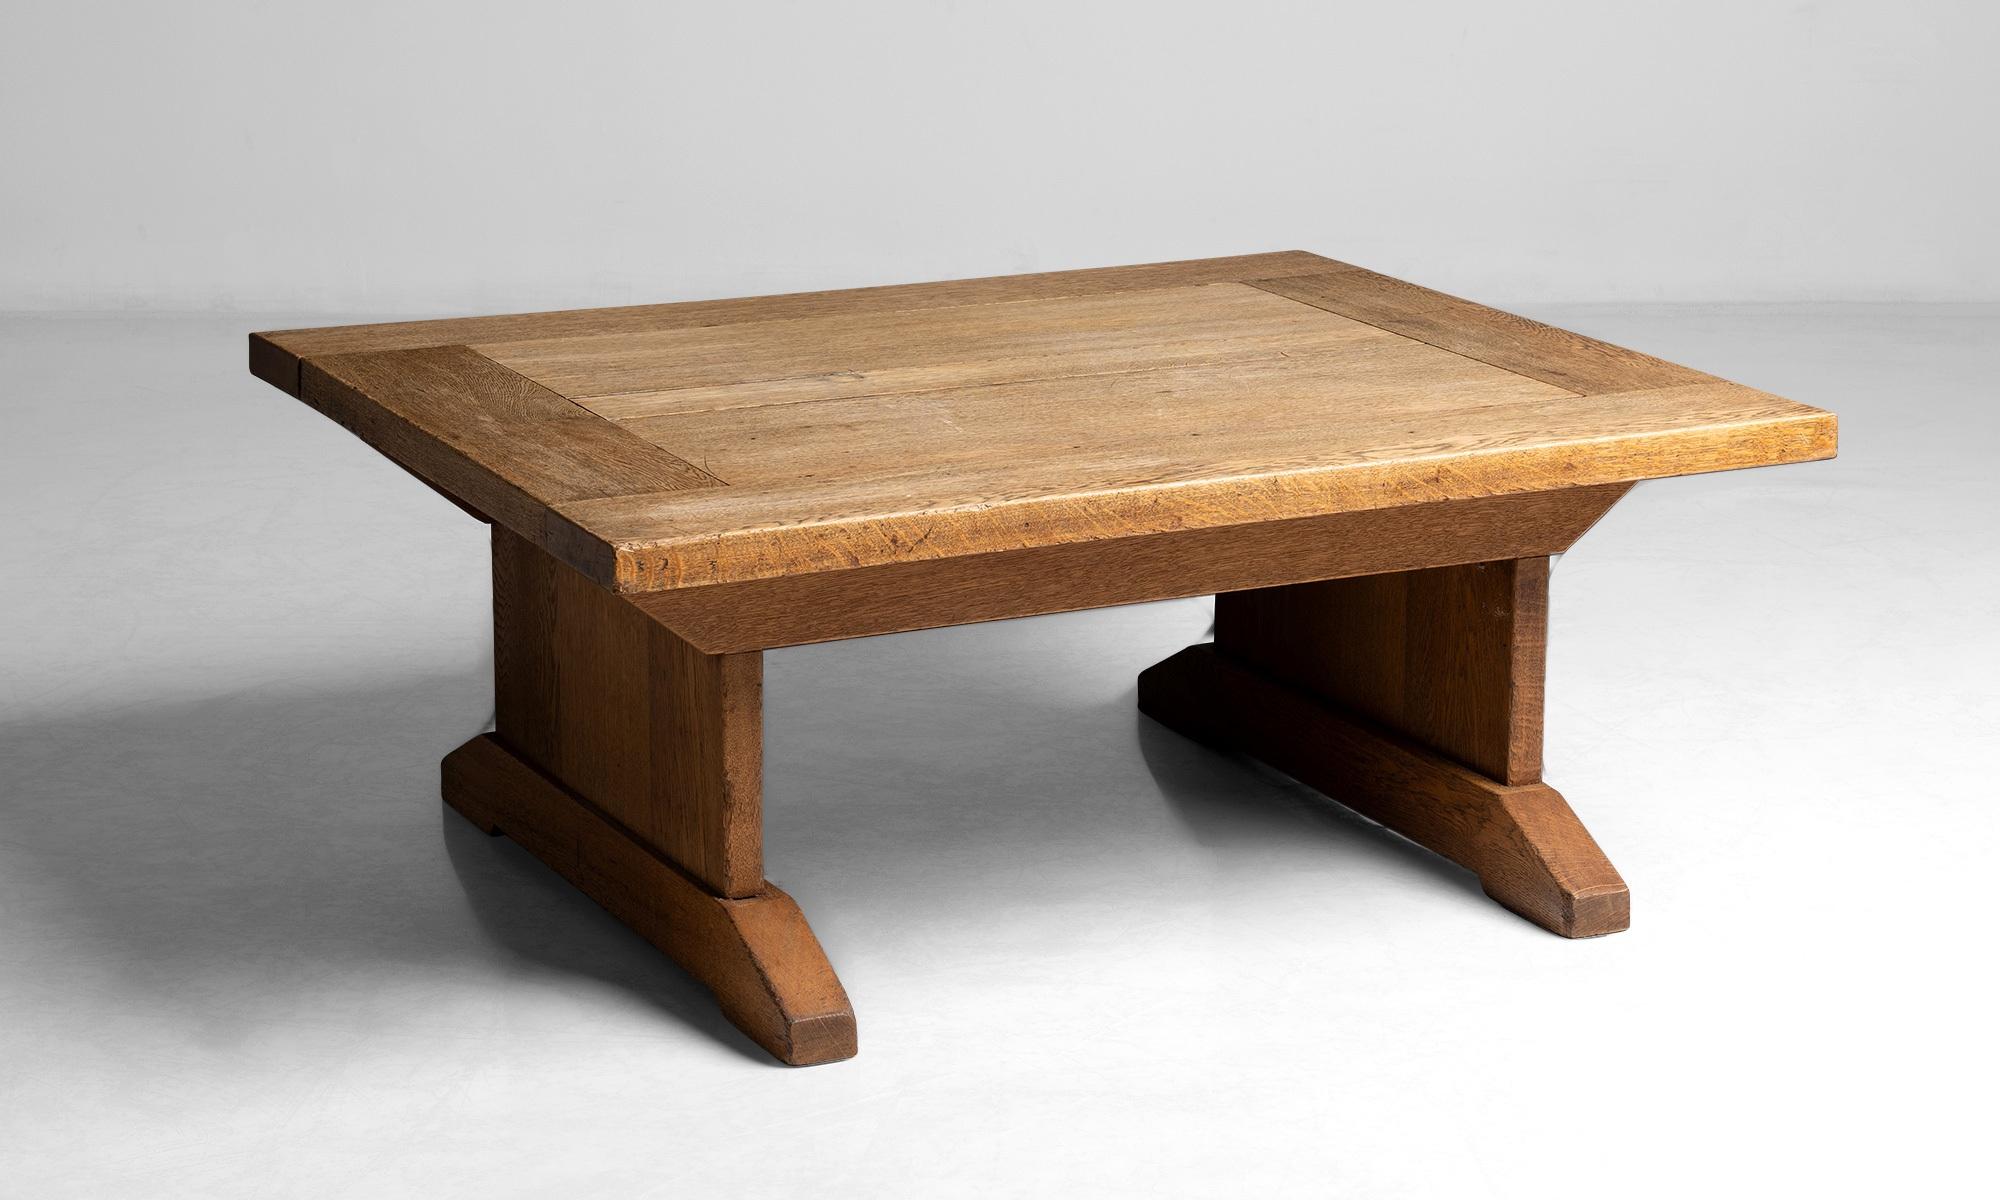 Oak coffee table.

England, circa 1930

Brutalist low coffee table constructed in oak.

Measures: 42